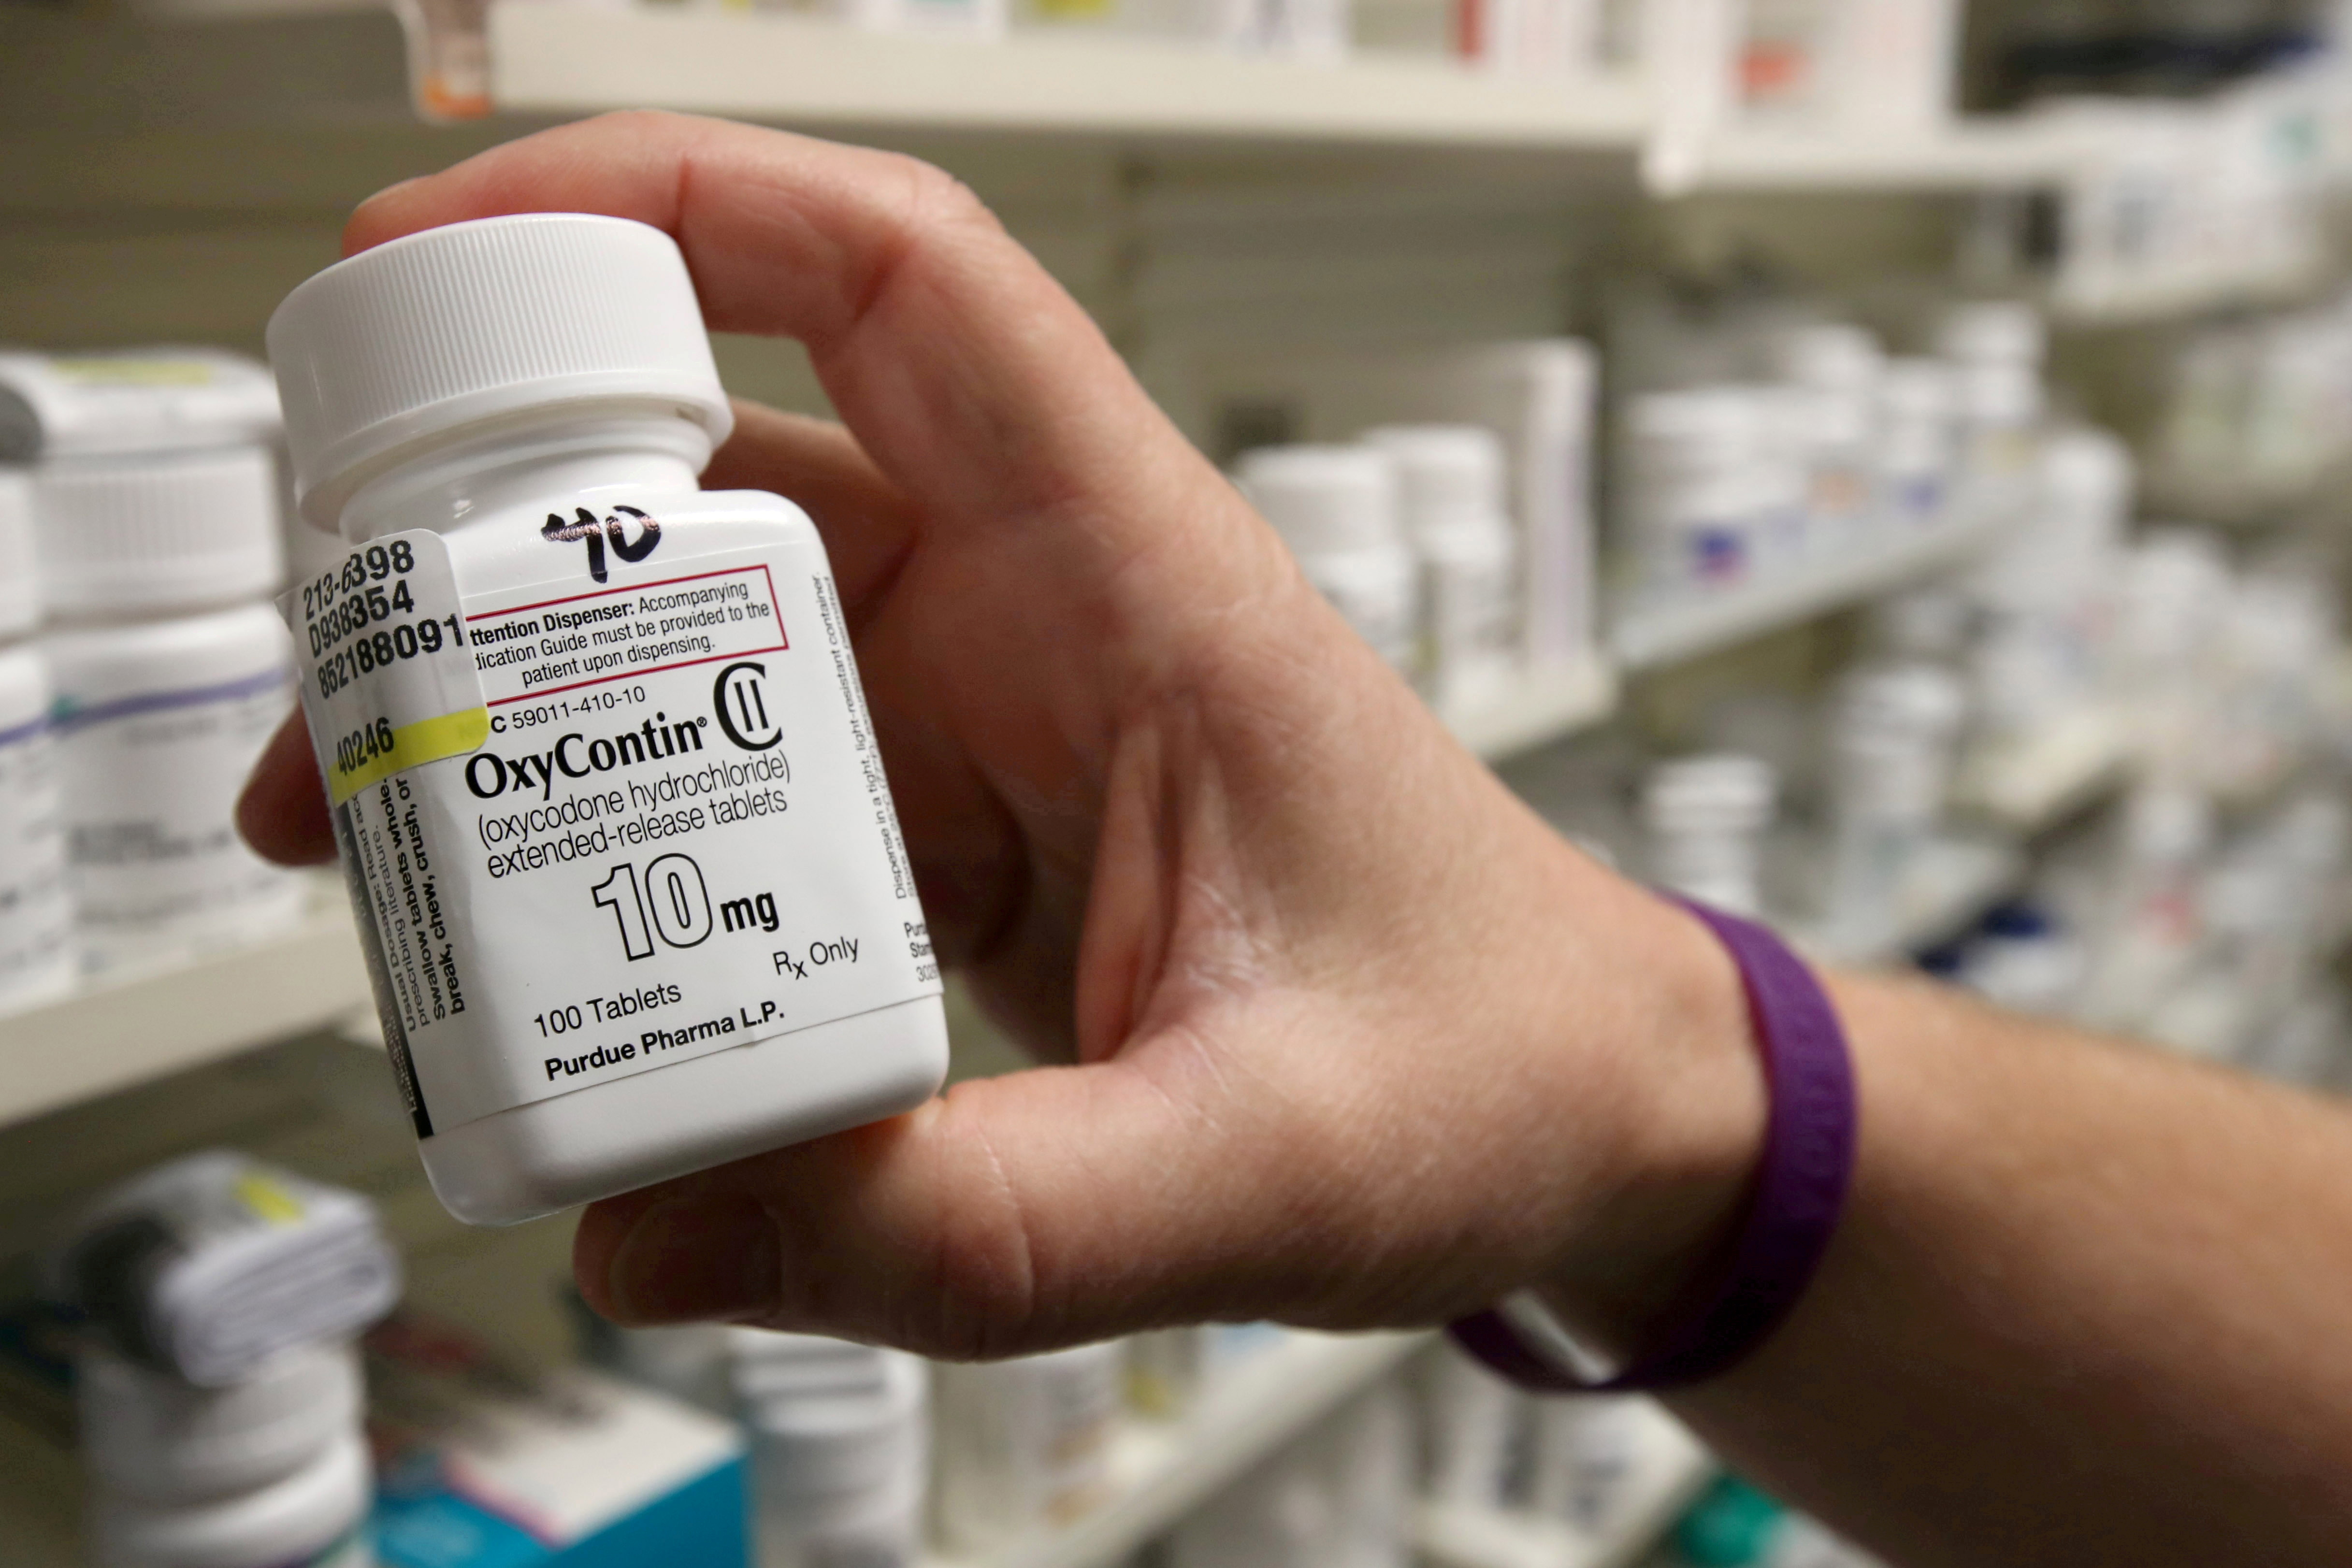 A pharmacist holds a bottle OxyContin made by Purdue Pharma, at a pharmacy in Provo, Utah